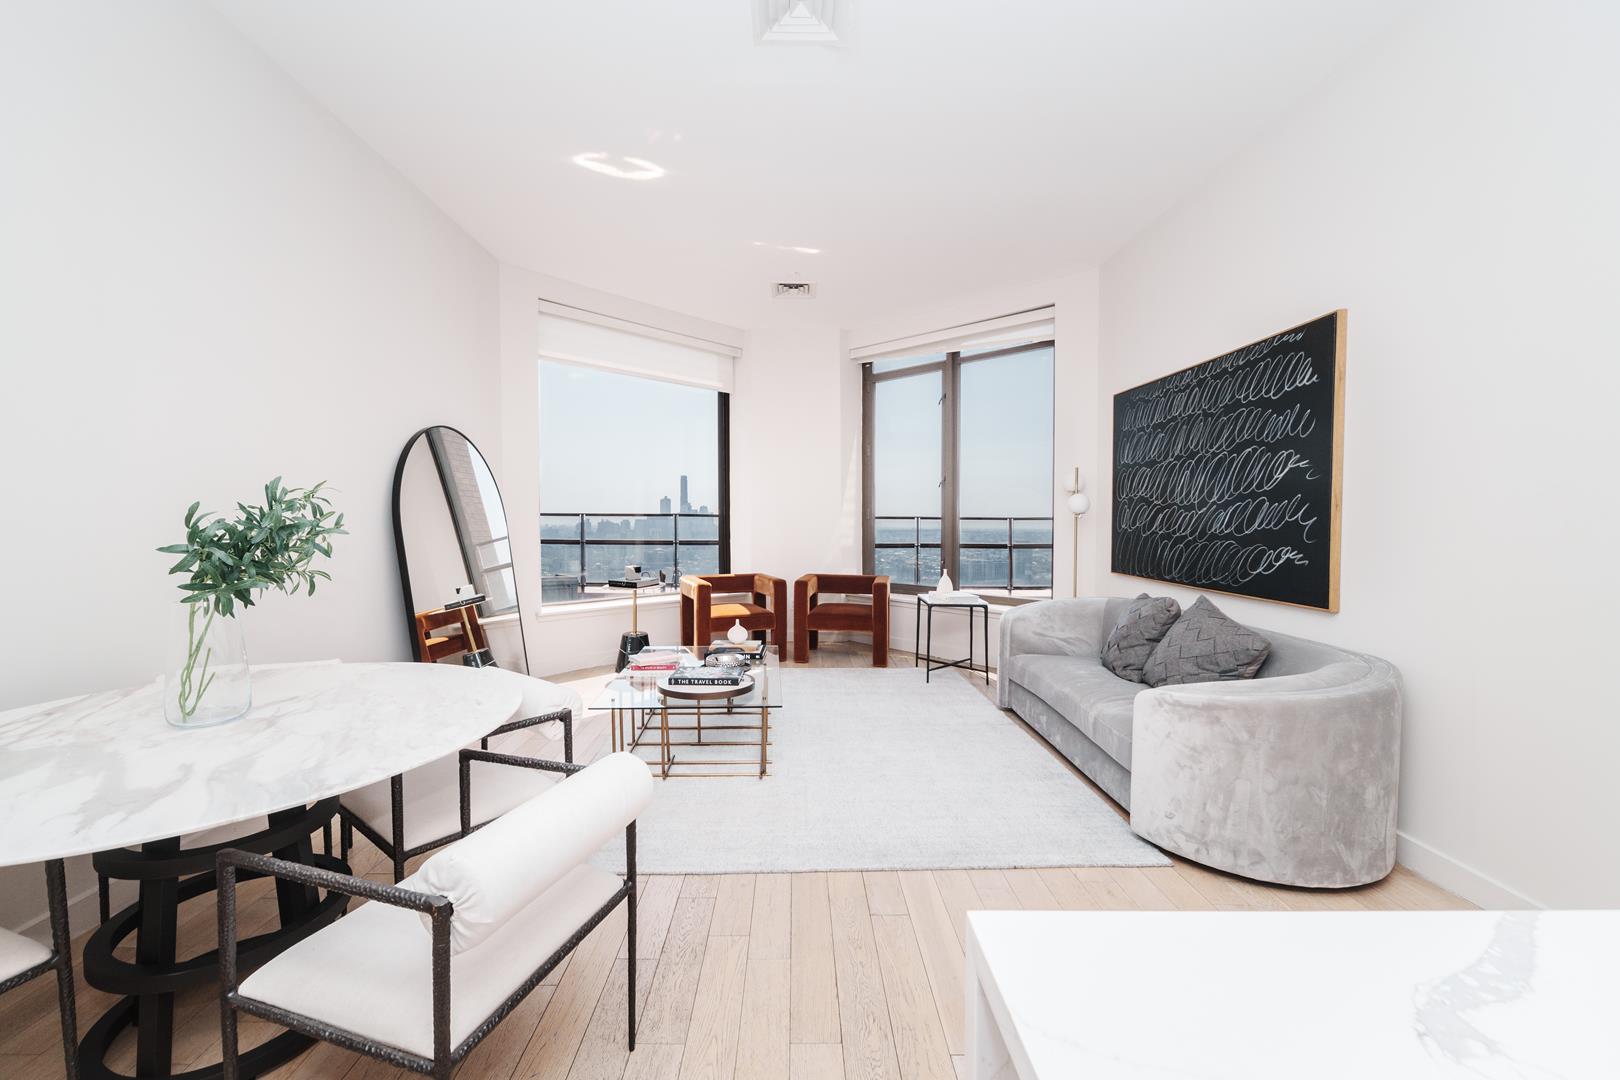 75 Wall Street Ph-L7, Financial District, Downtown, NYC - 2 Bedrooms  
2 Bathrooms  
6 Rooms - 